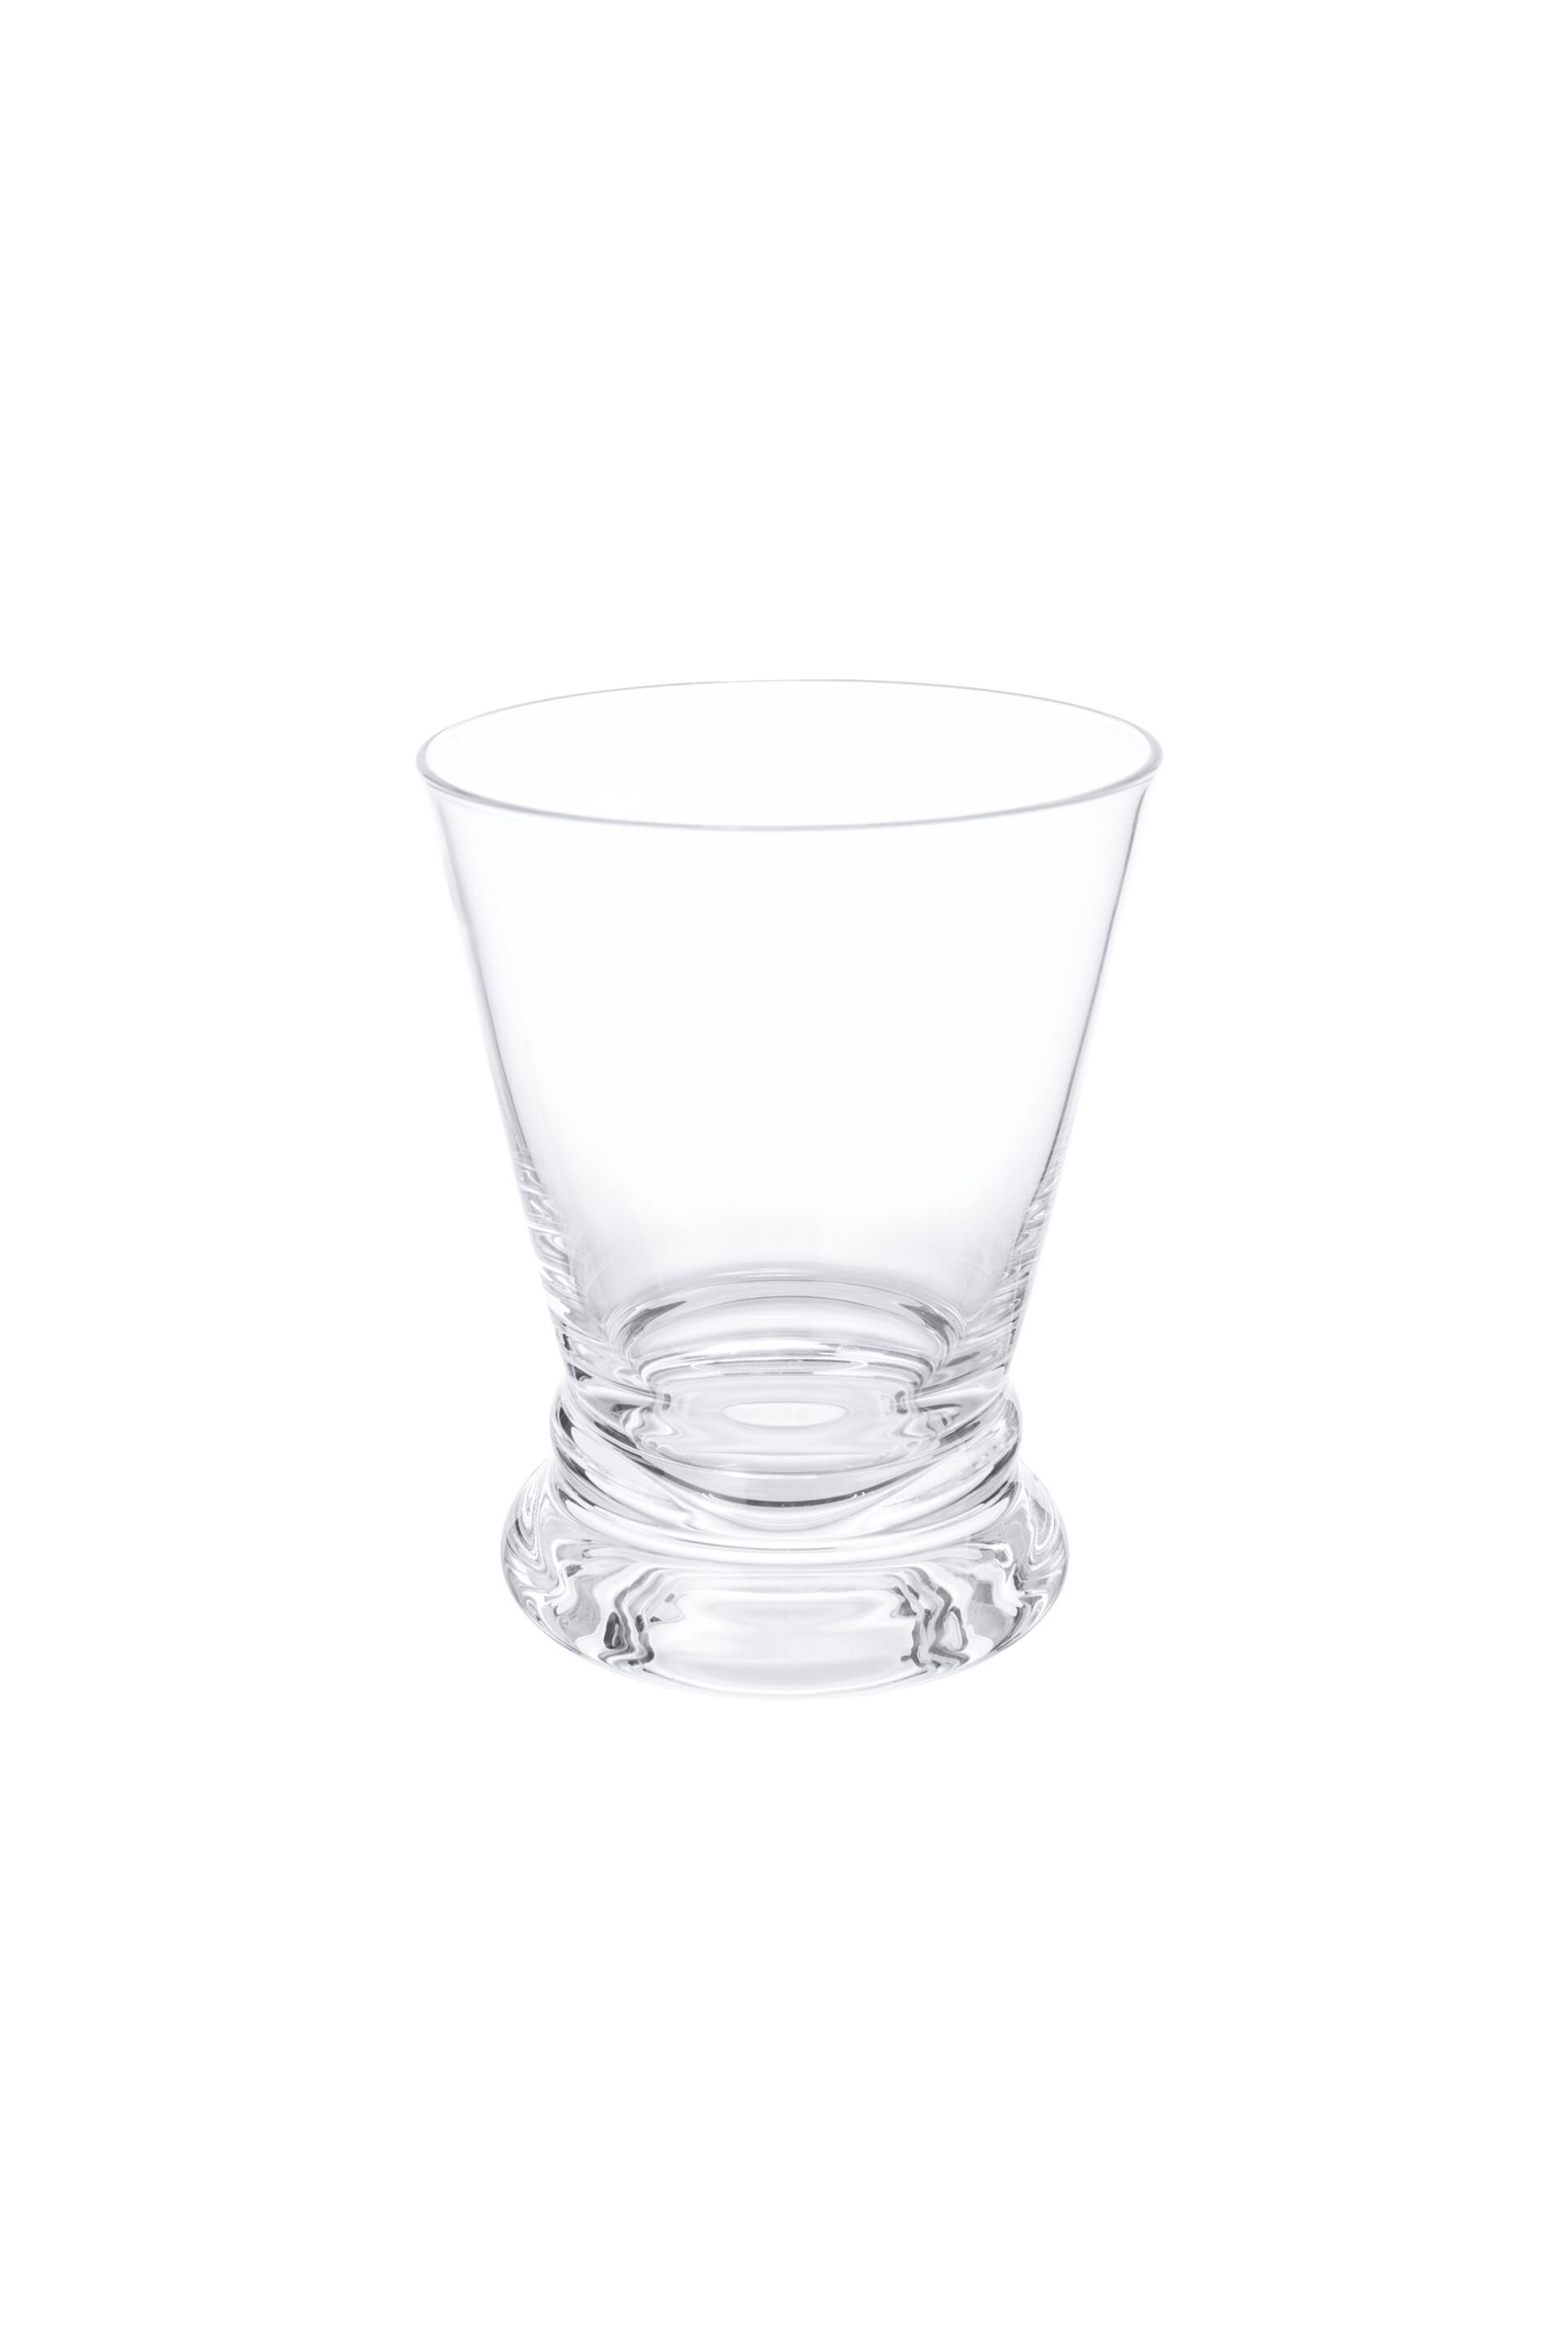 Mary Berry Set of 4 Clear Signature Tumbler Glasses - Image 3 of 4